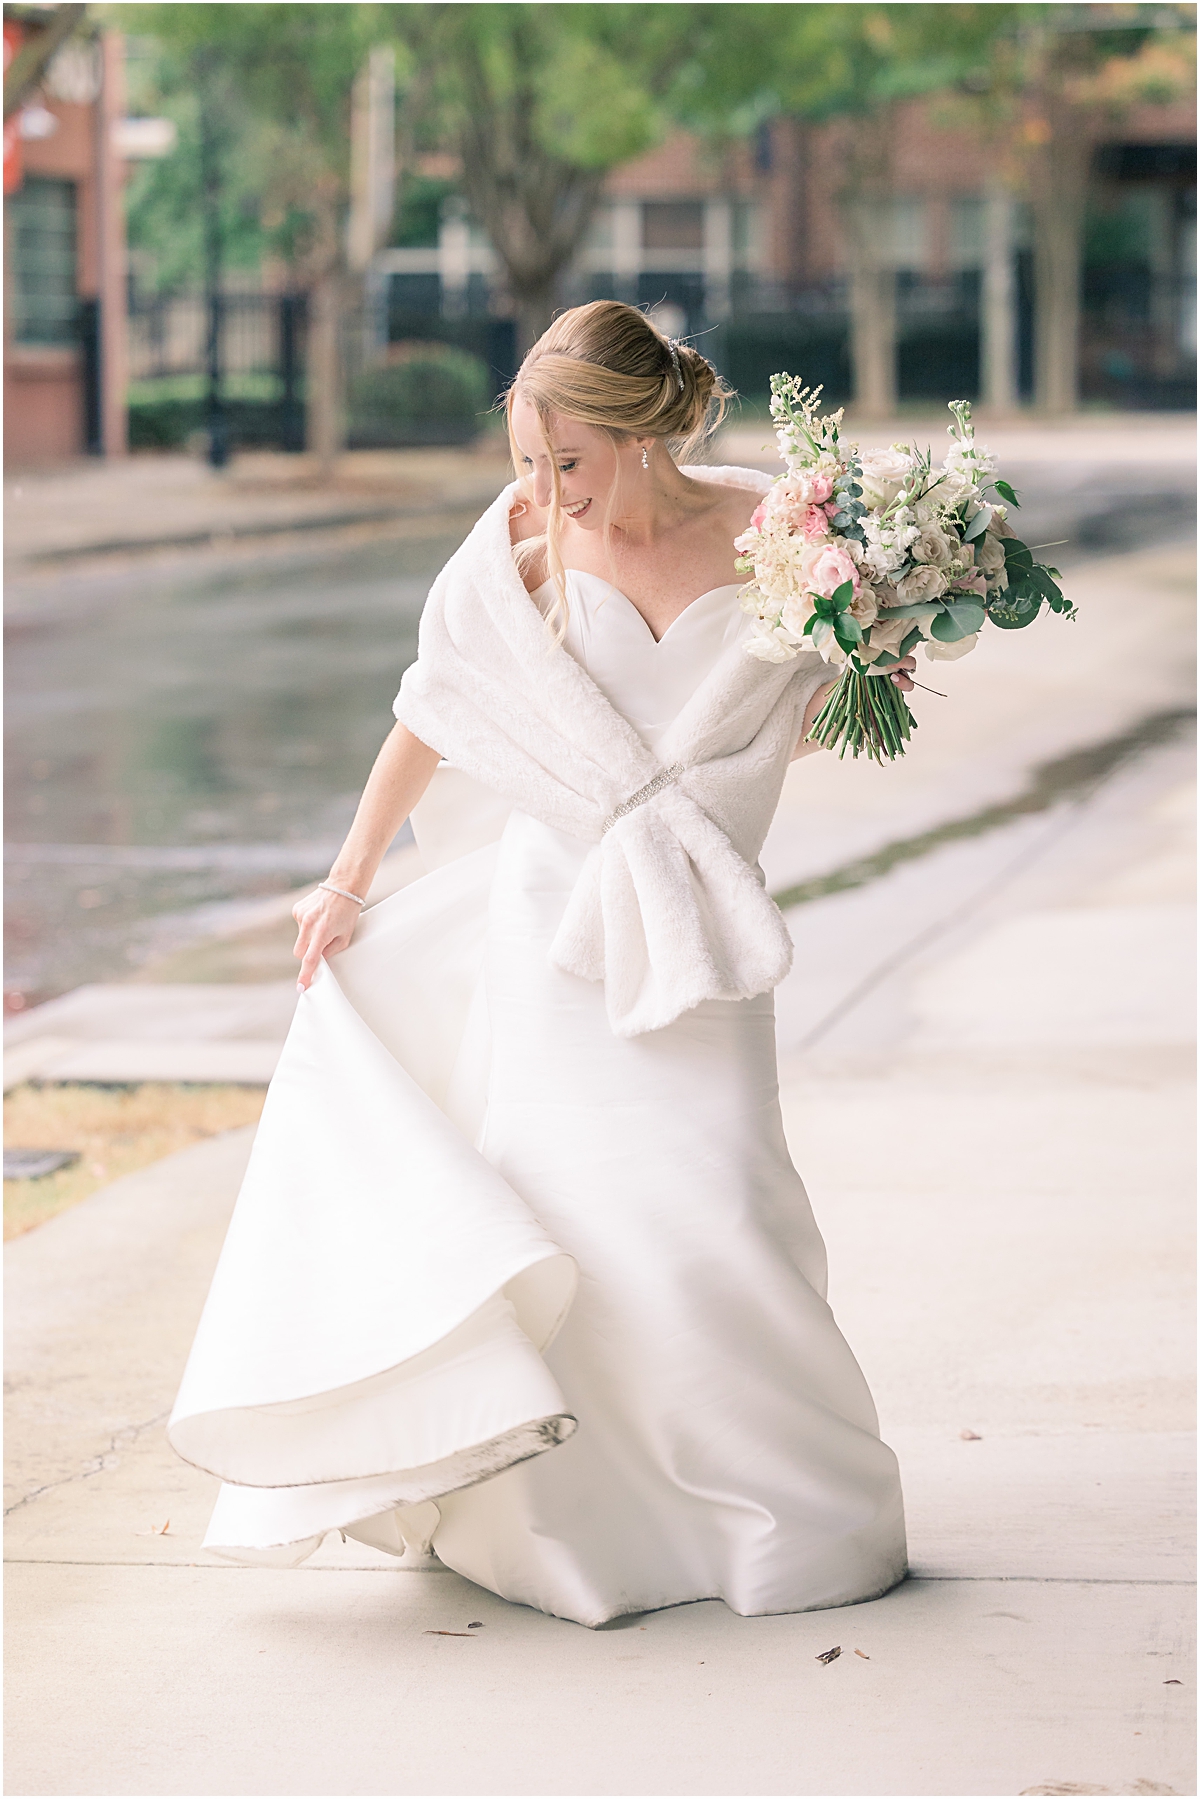 Rebecca swinging her bridal dress around while she wears a white fur cape and holds her bridal bouquet at the Foundry at Puritan Mill